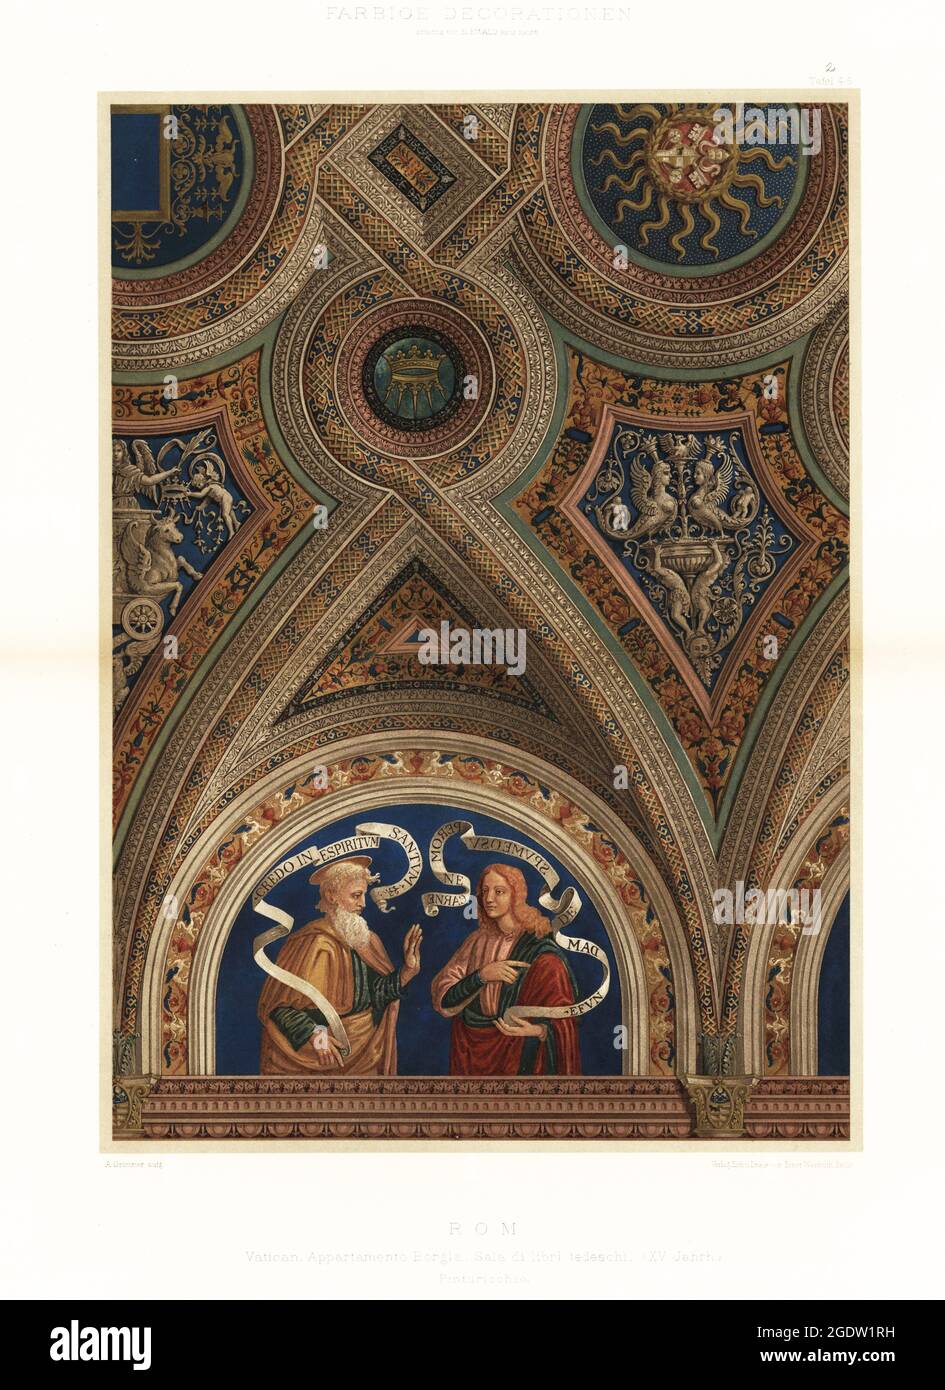 Ceiling in the hall of German books, Vatican Library, Rome, 15th century. Frescos by Pinturicchio or Bernardino di Betto in the Borgia Apartments, a suite of rooms in the Apostolic Palace. Sala di libri tedeschi, Vatican Appartamento Borgia, Rom, XV Jahrh.. Chromolithograph by A. Grimmer after from Ernst Ewald’s Farbige decorationen, alter und never Zeit (Color decoration, ancient and new eras), Ernst Wasmuth, Berlin, 1896. Stock Photo